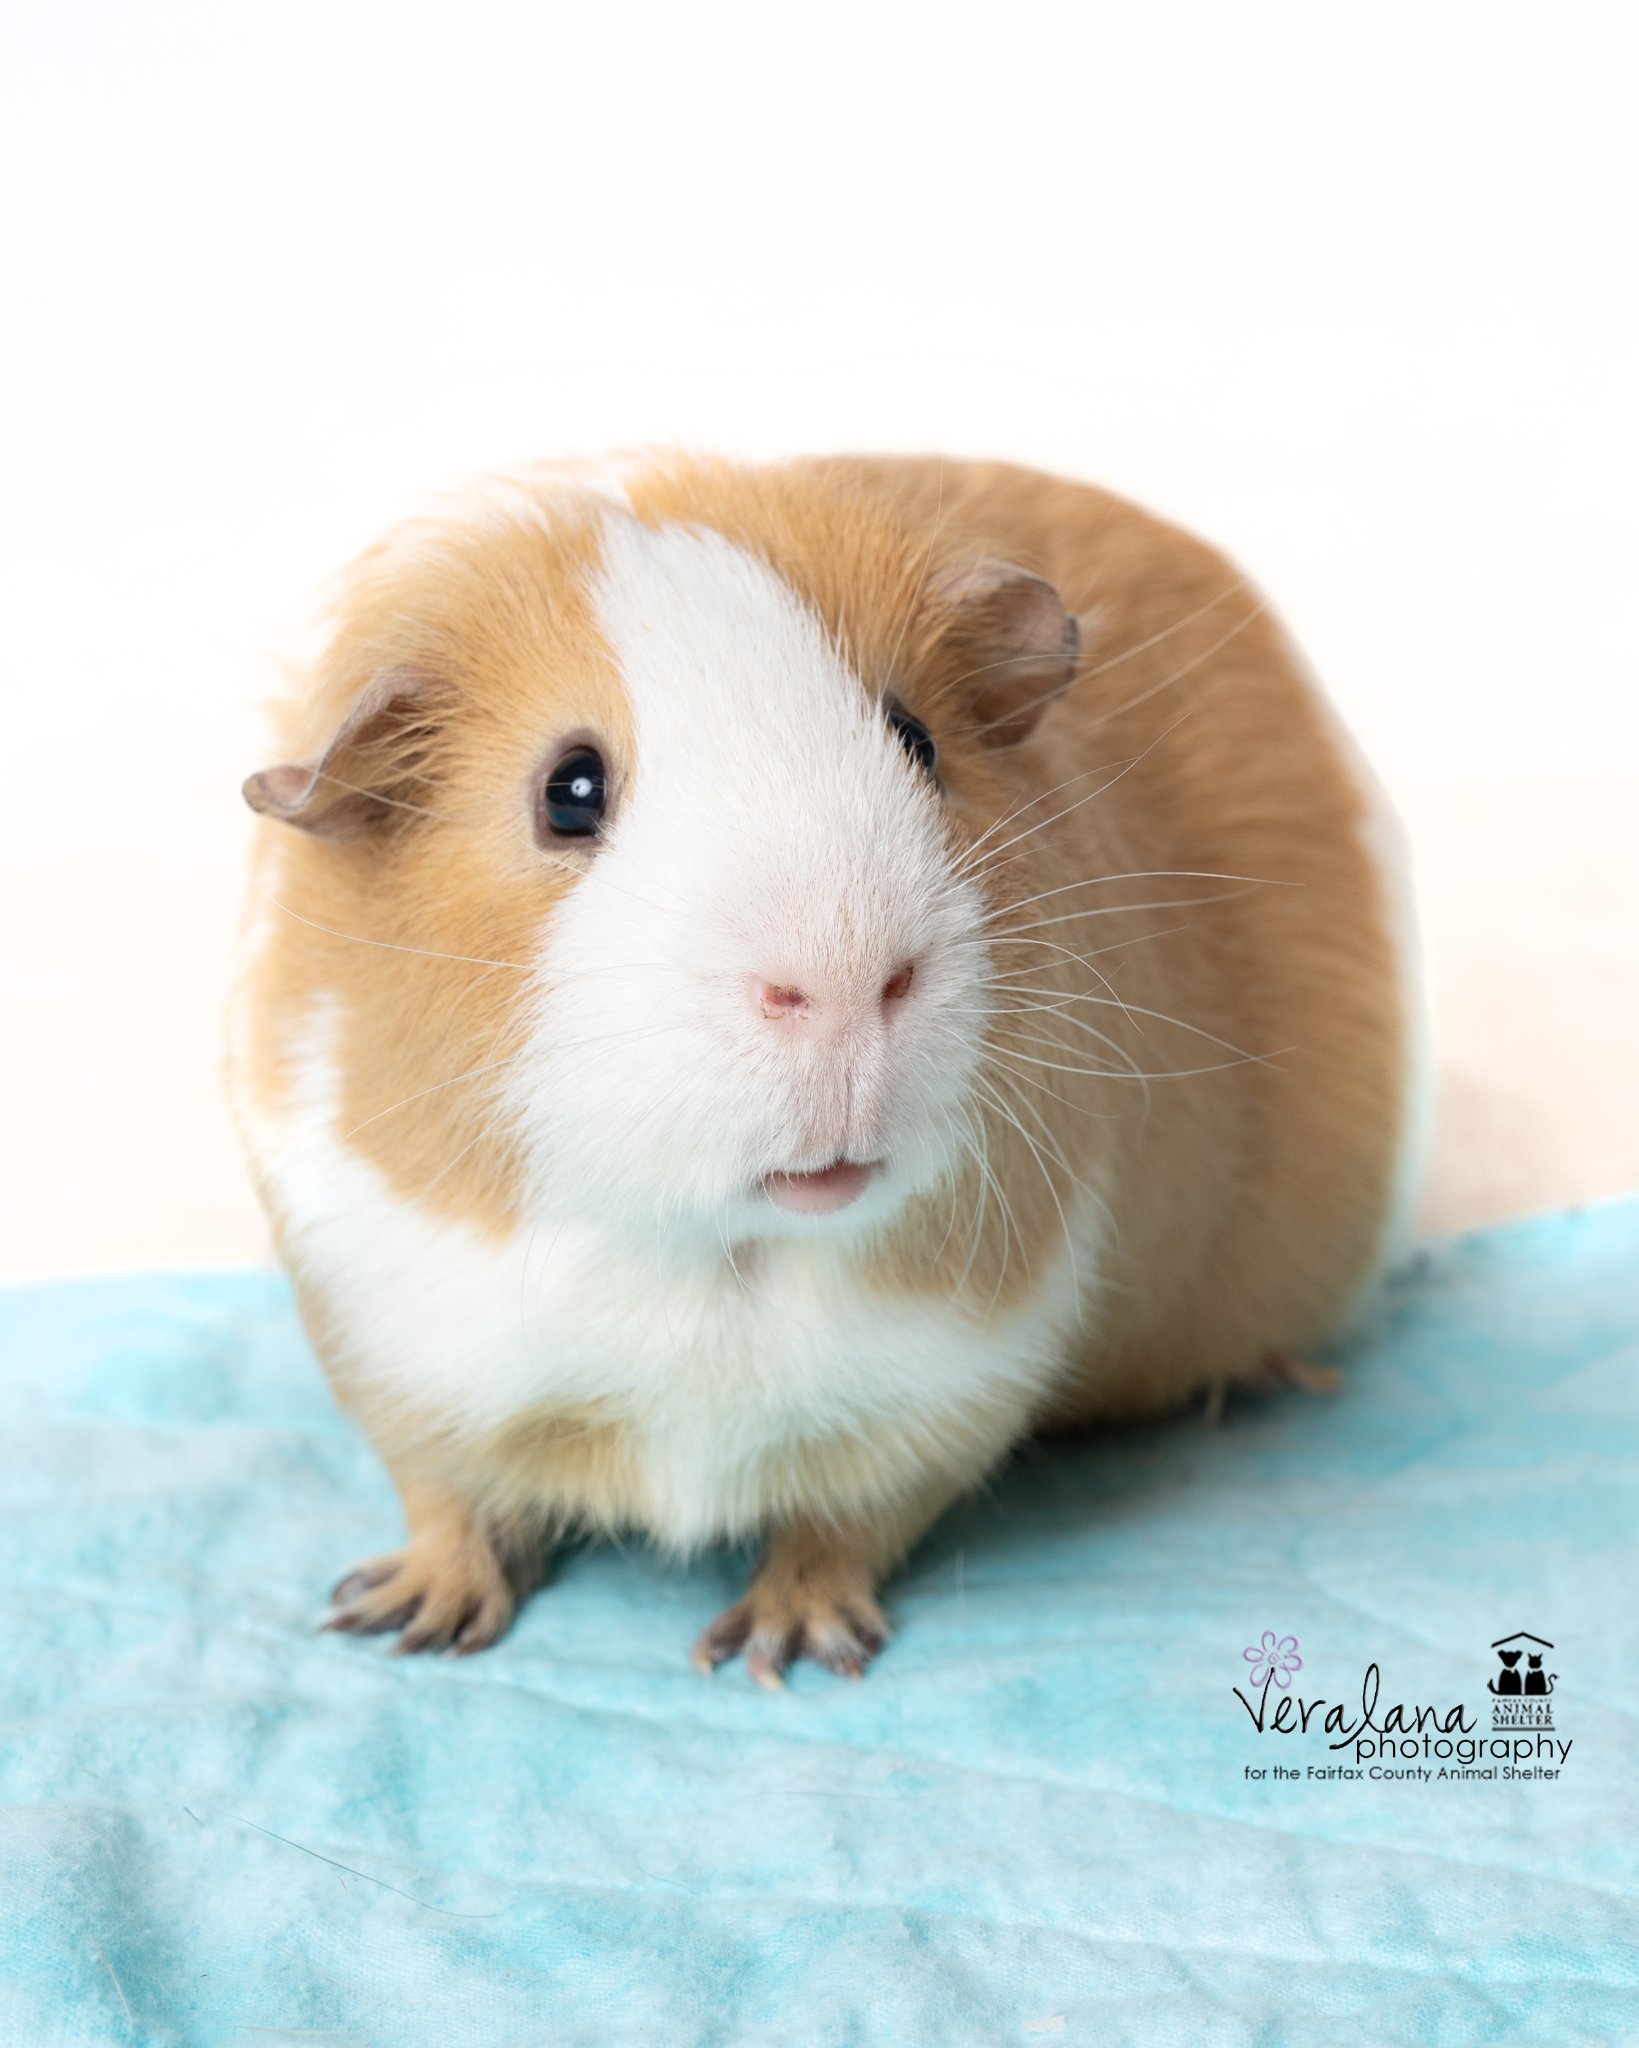 The most adorable butterscotch and white guinea pig stares lovingly at the photographer. 